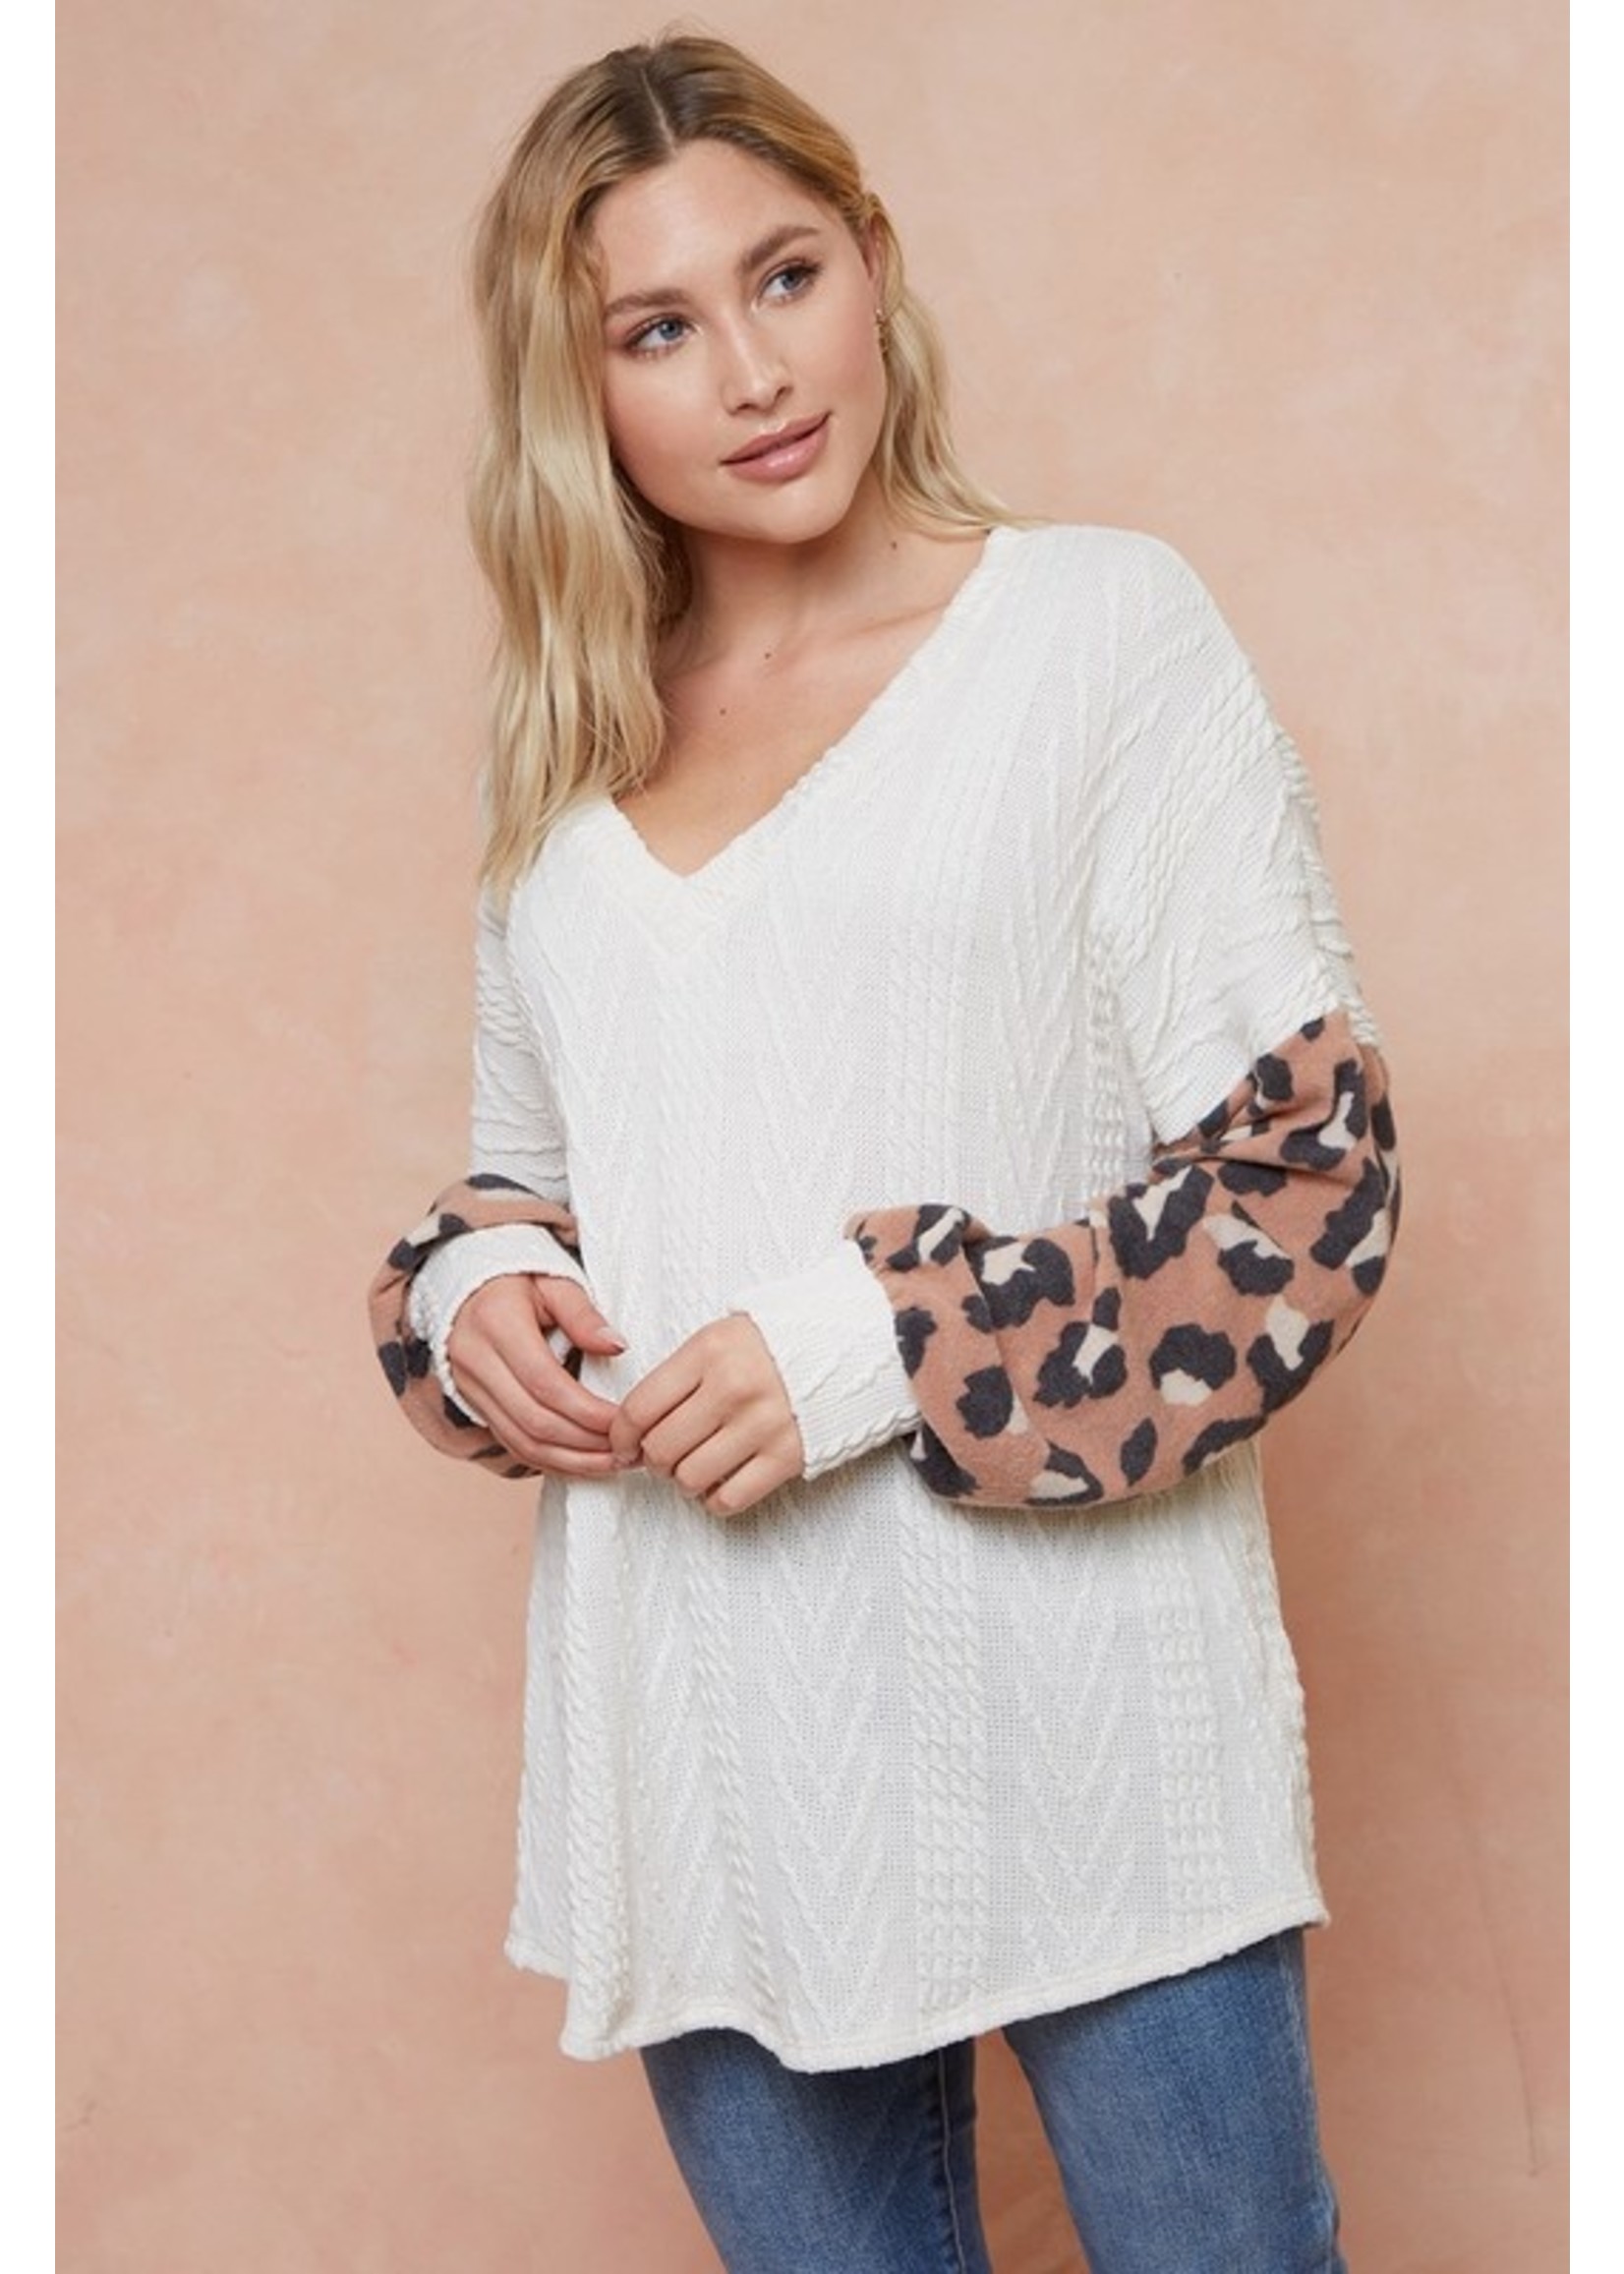 The Vale Leopard Sleeve Sweater Top